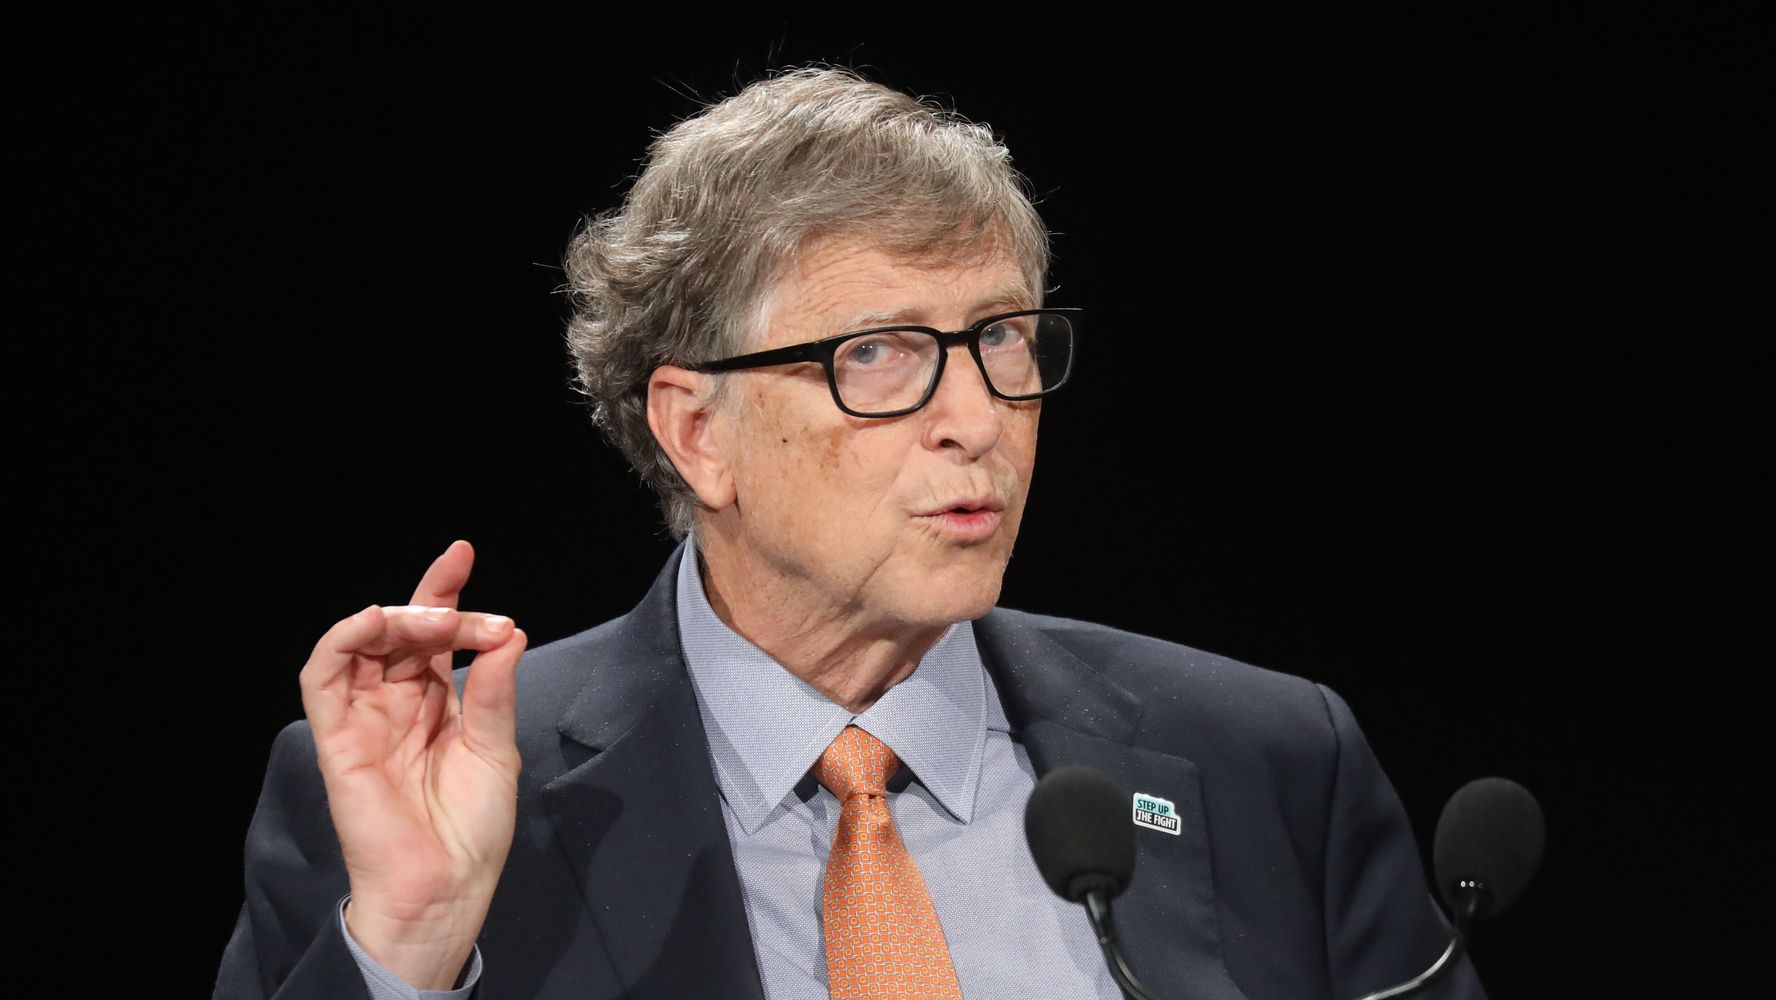 Microsoft Probed Bill Gates’ Past Affair With Employee Before He Left Board